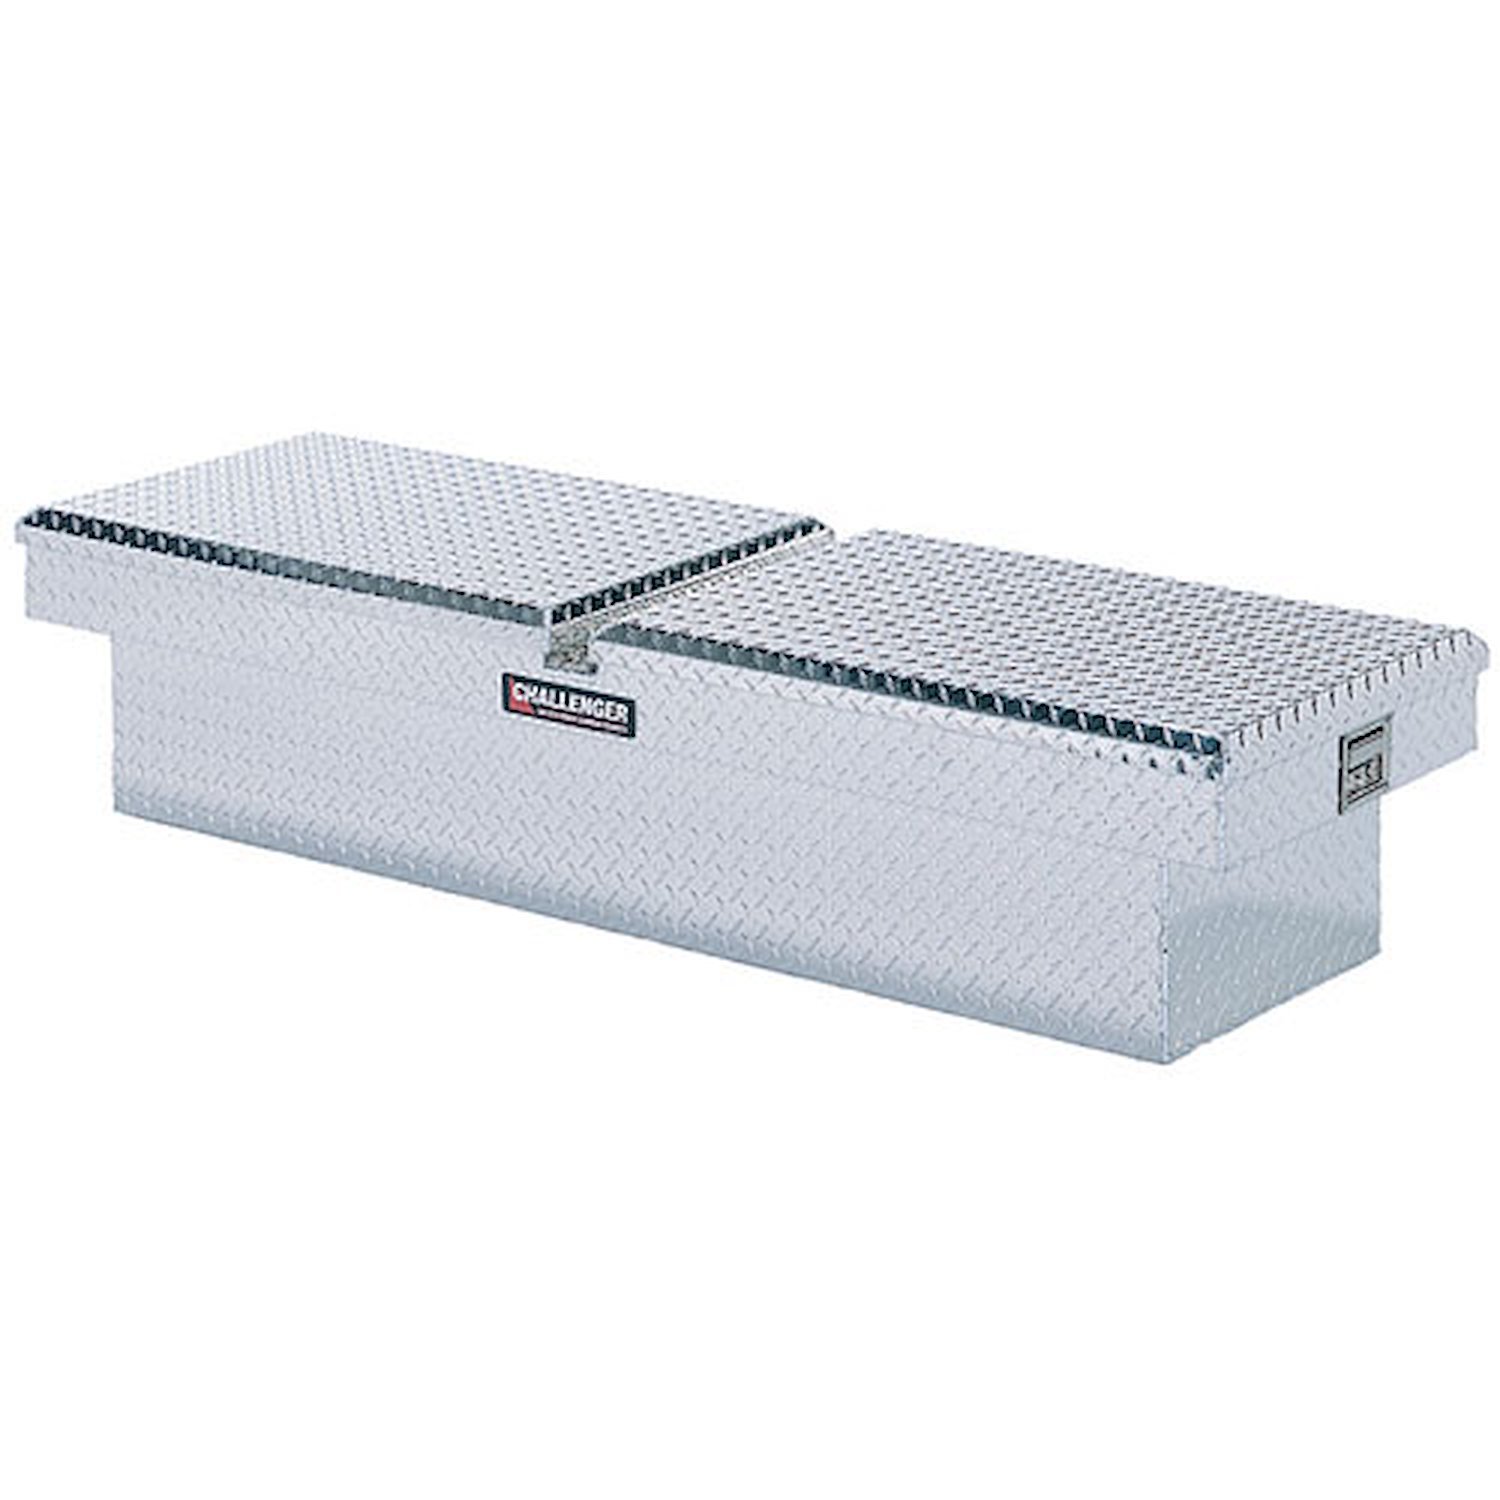 Truck Bed Challenger Tool Box Length: 73.75"